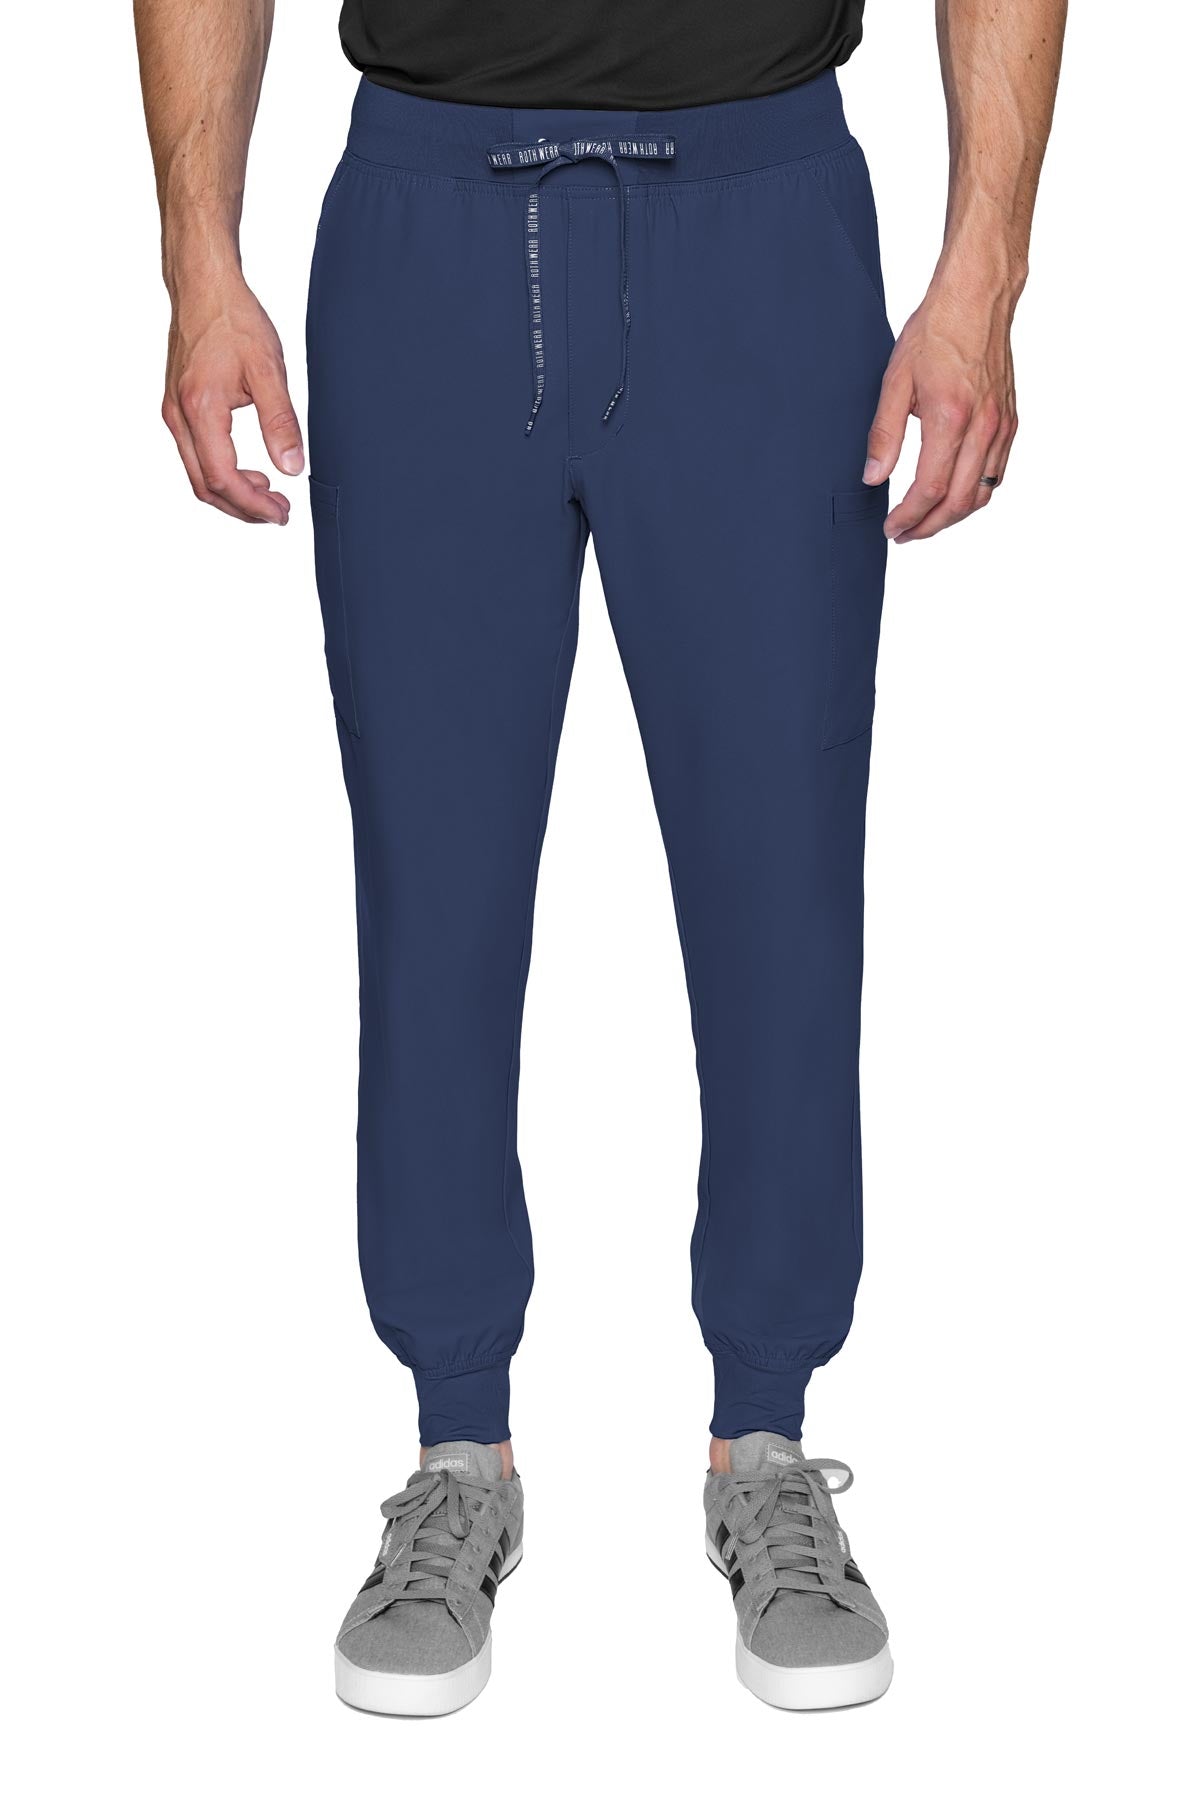 Med Couture Roth Wear Insight 2765 Jogger Pant Navy Blue